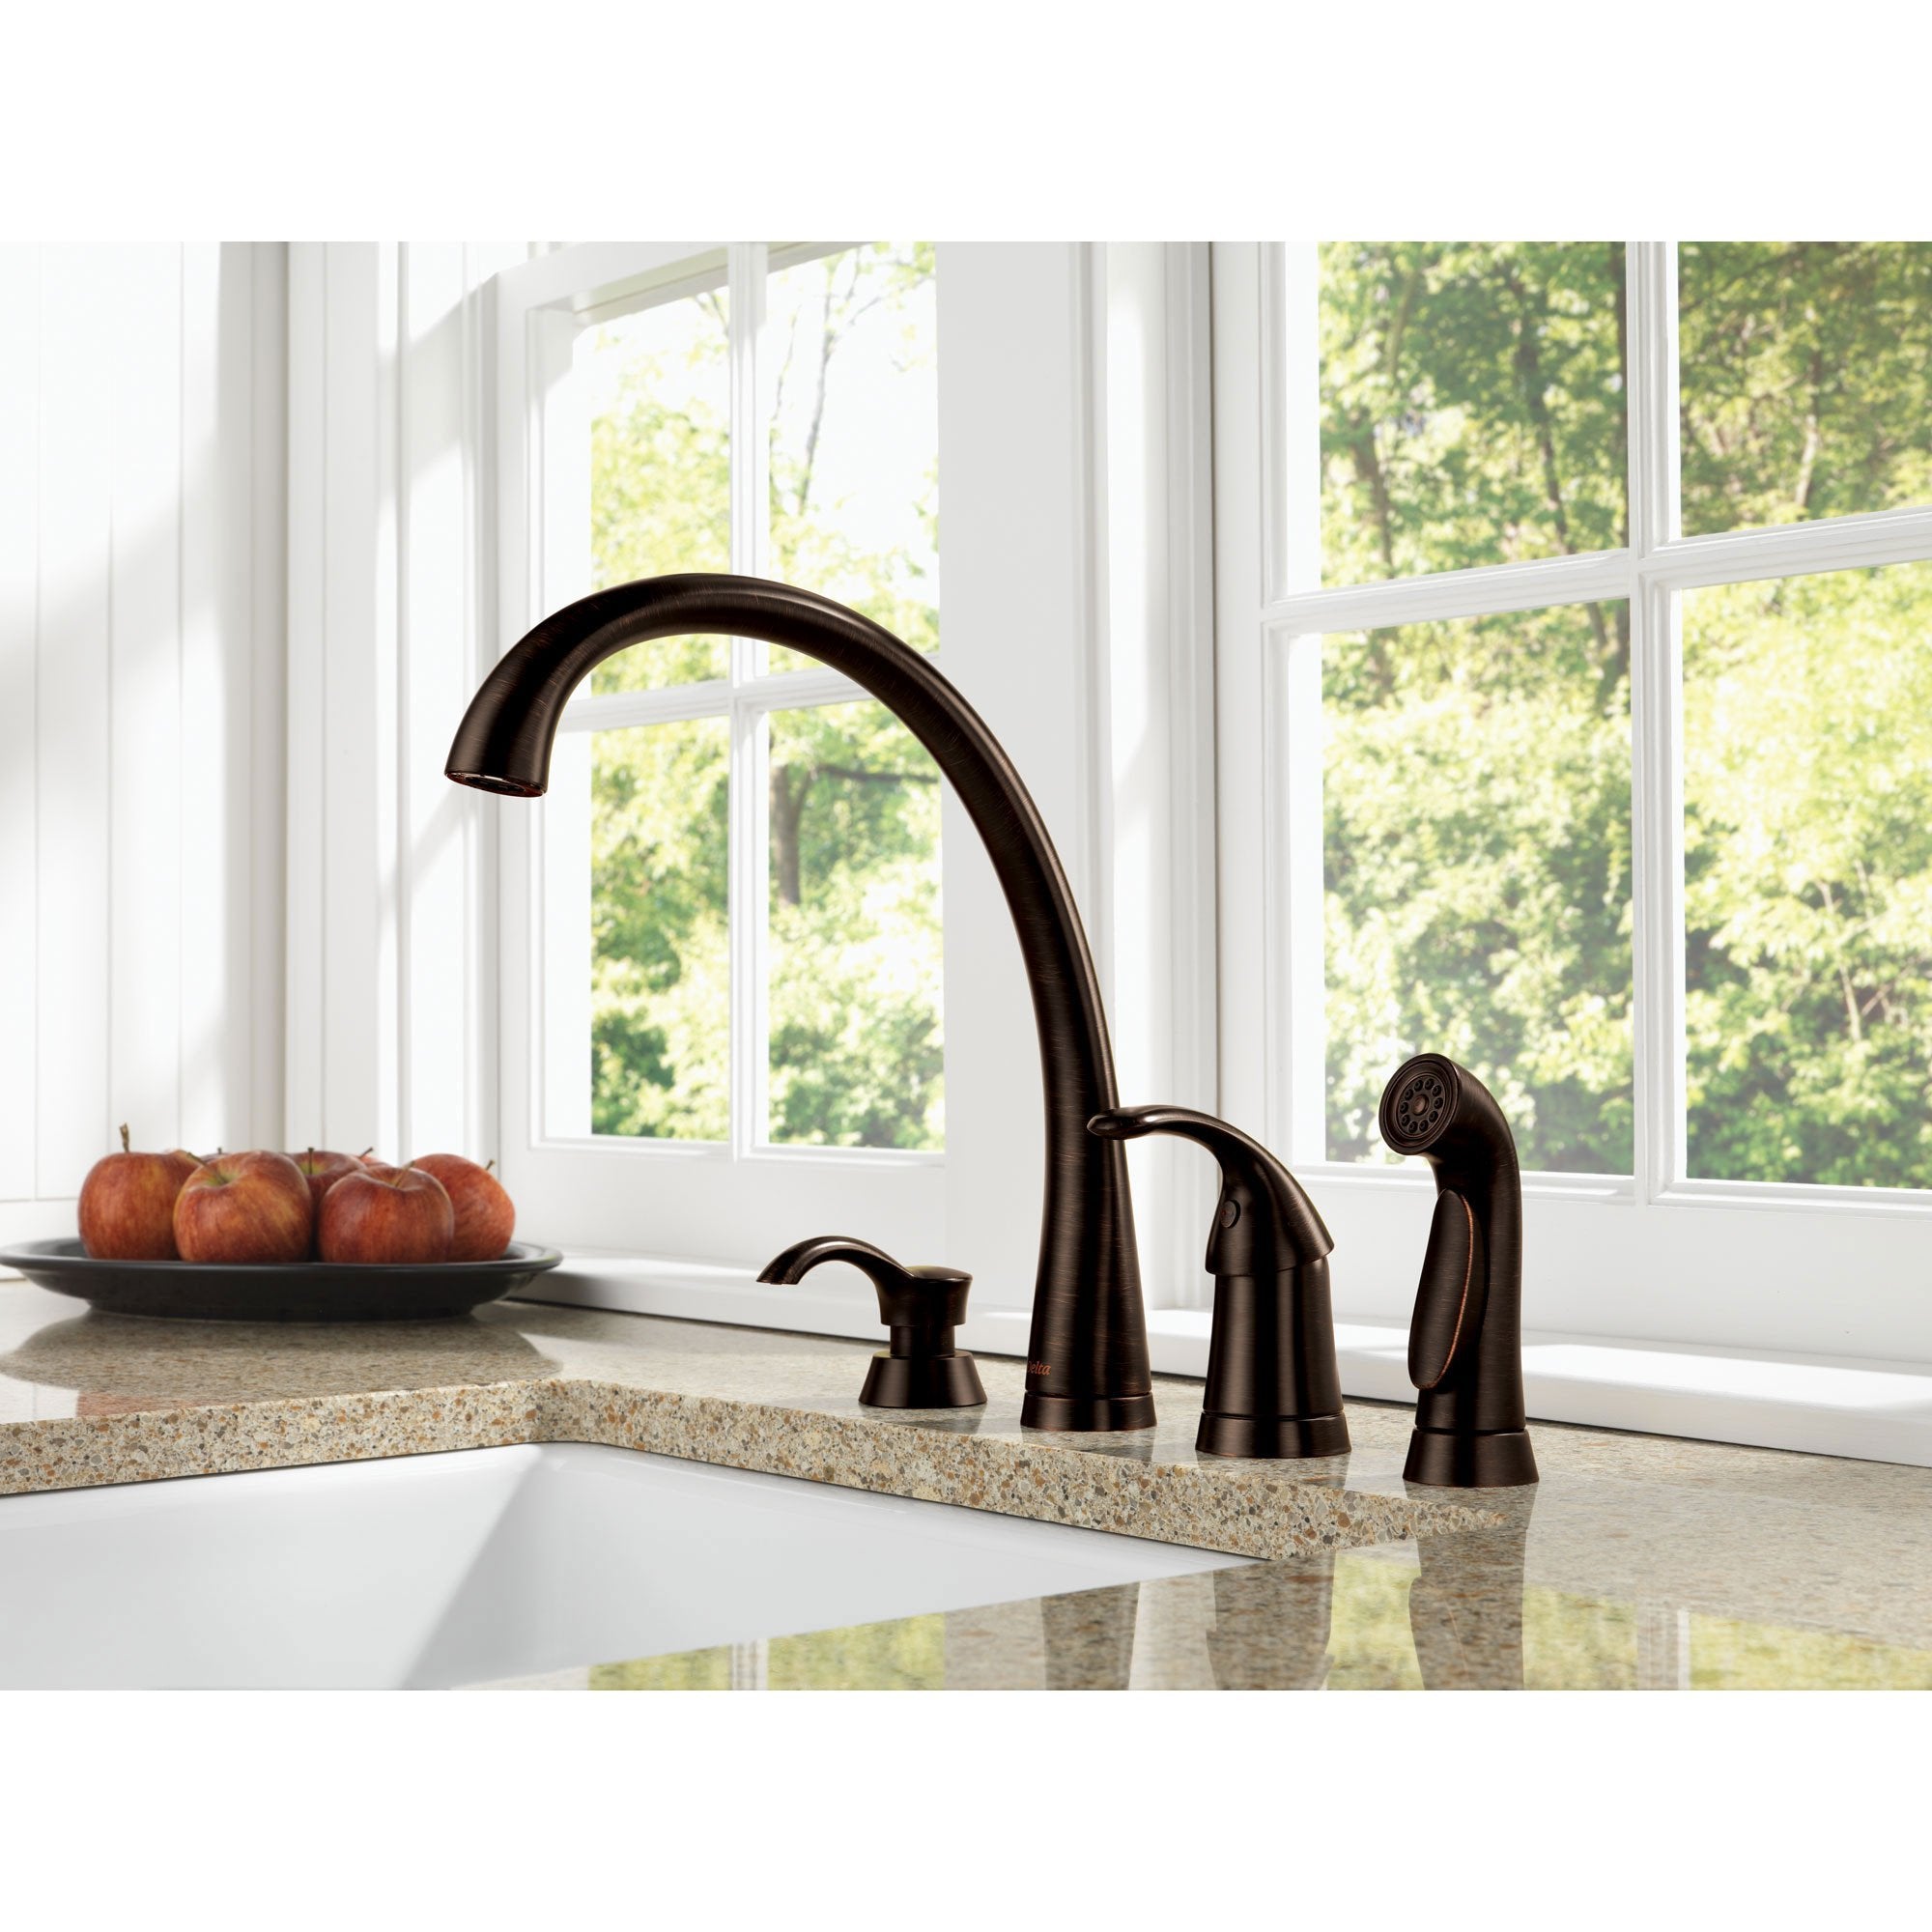 Delta Venetian Bronze Finish Pilar Modern Single Handle Kitchen Faucet with Side Spray and Deck Mount Soap Dispenser Package D069CR